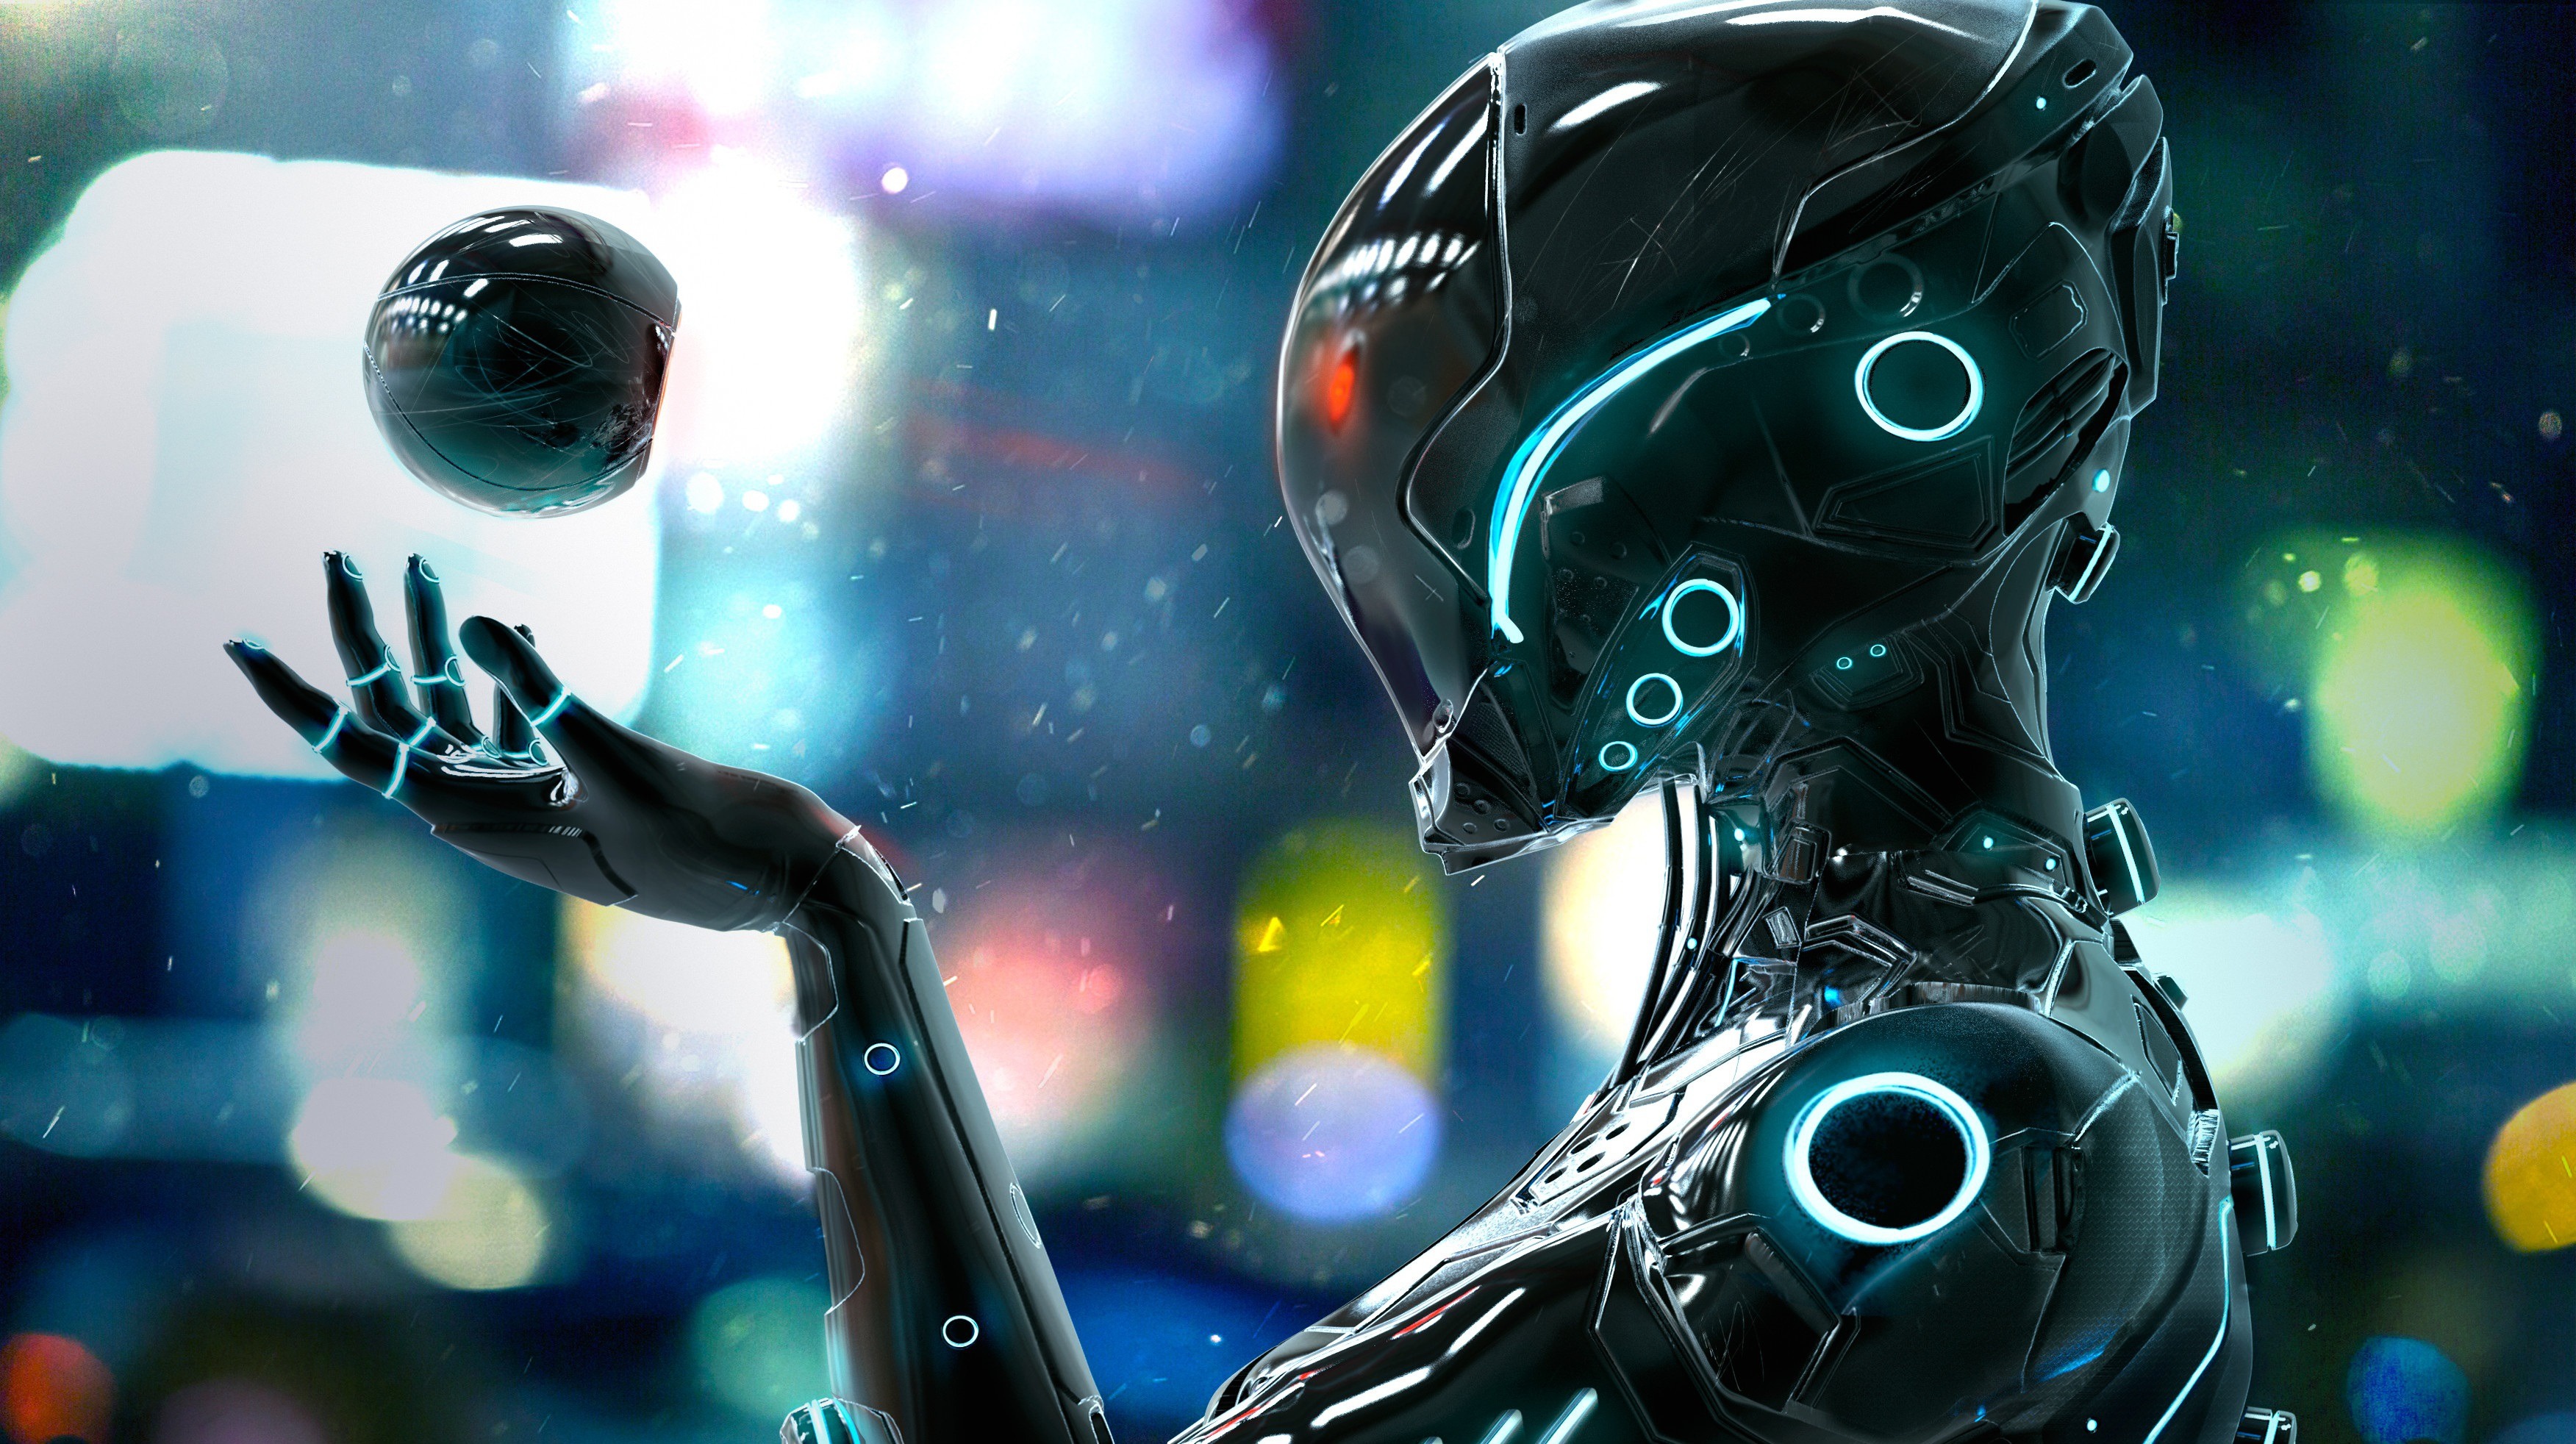 Robot Wallpapers (56+ images inside)